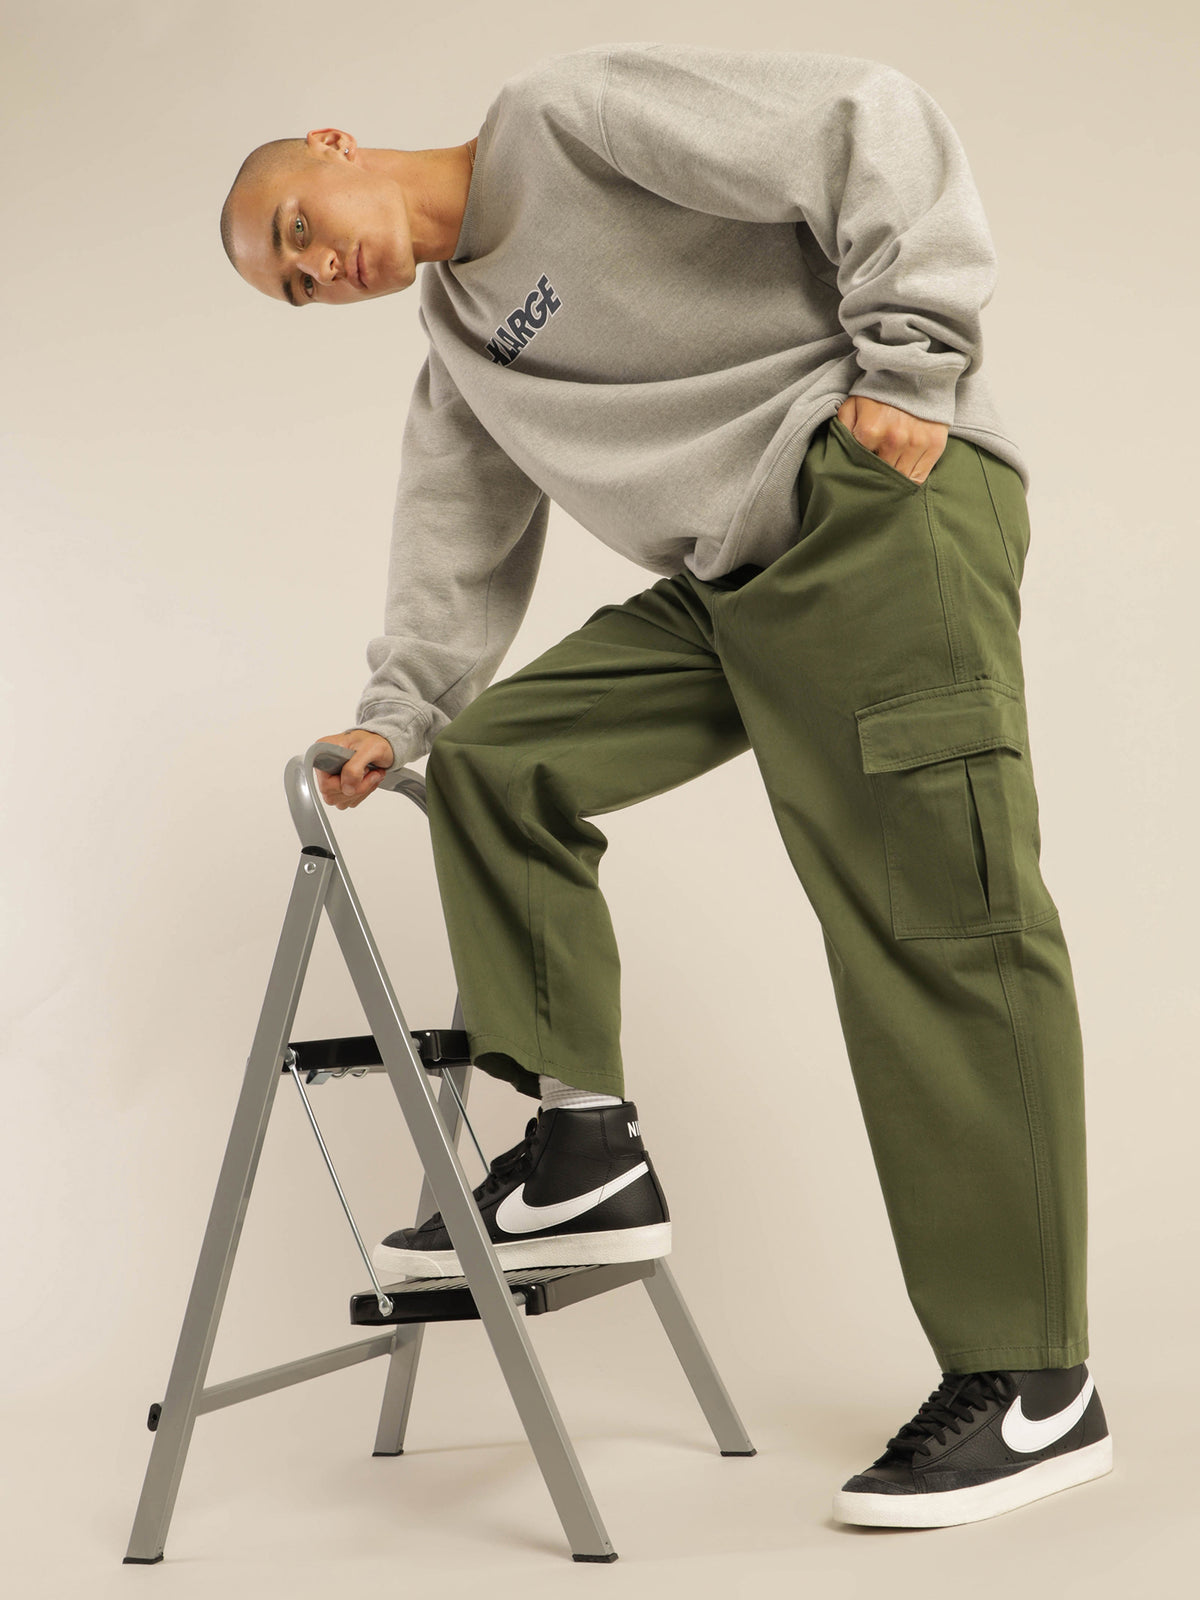 91 Cargo Pant in Military